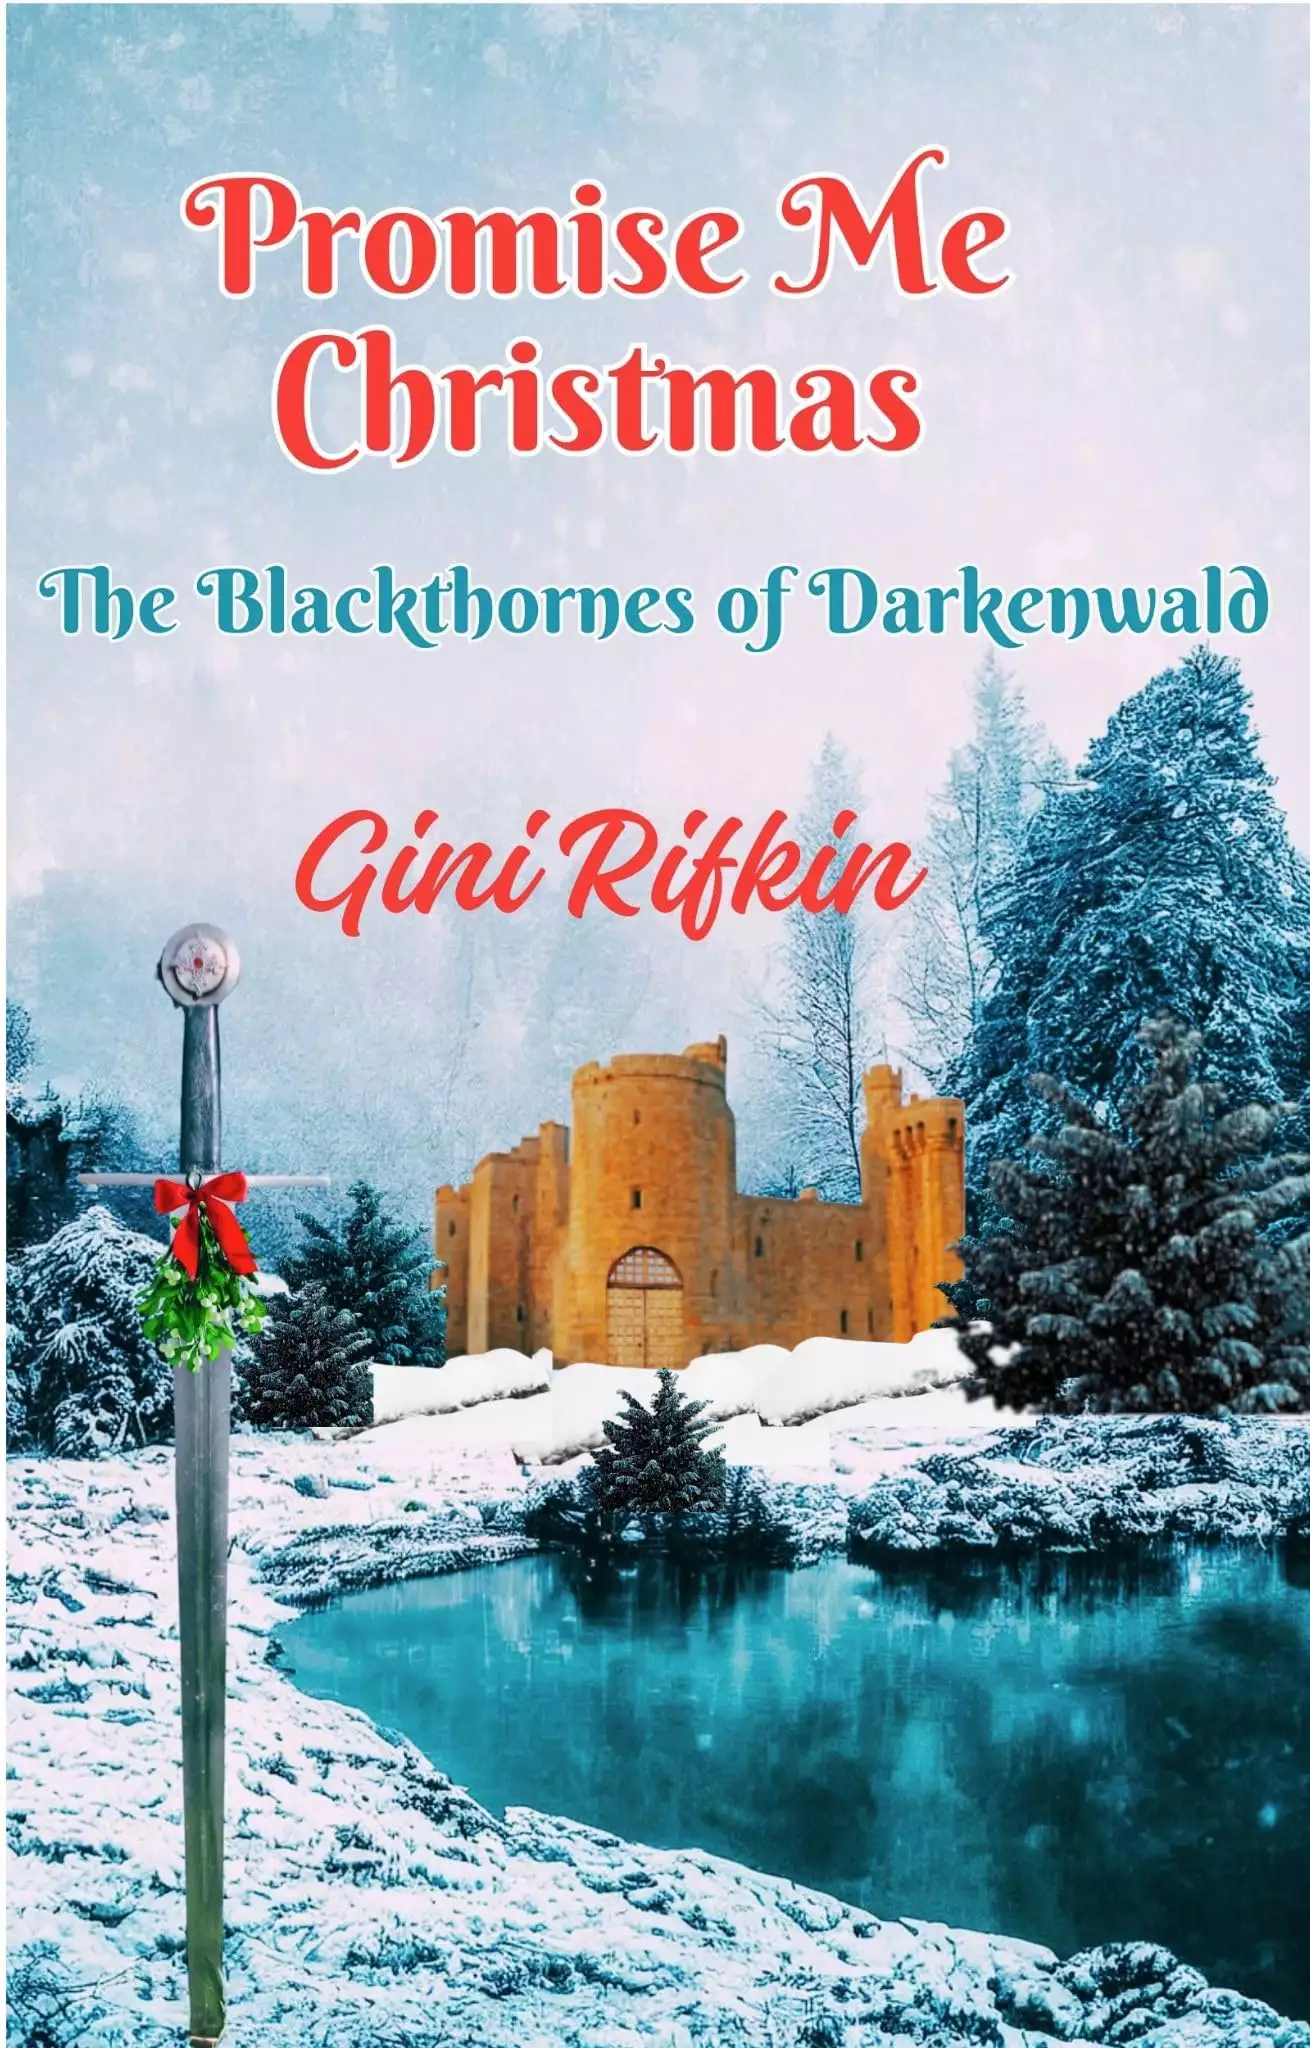 Promise Me Christmas: The Blackthornes of Darkenwald